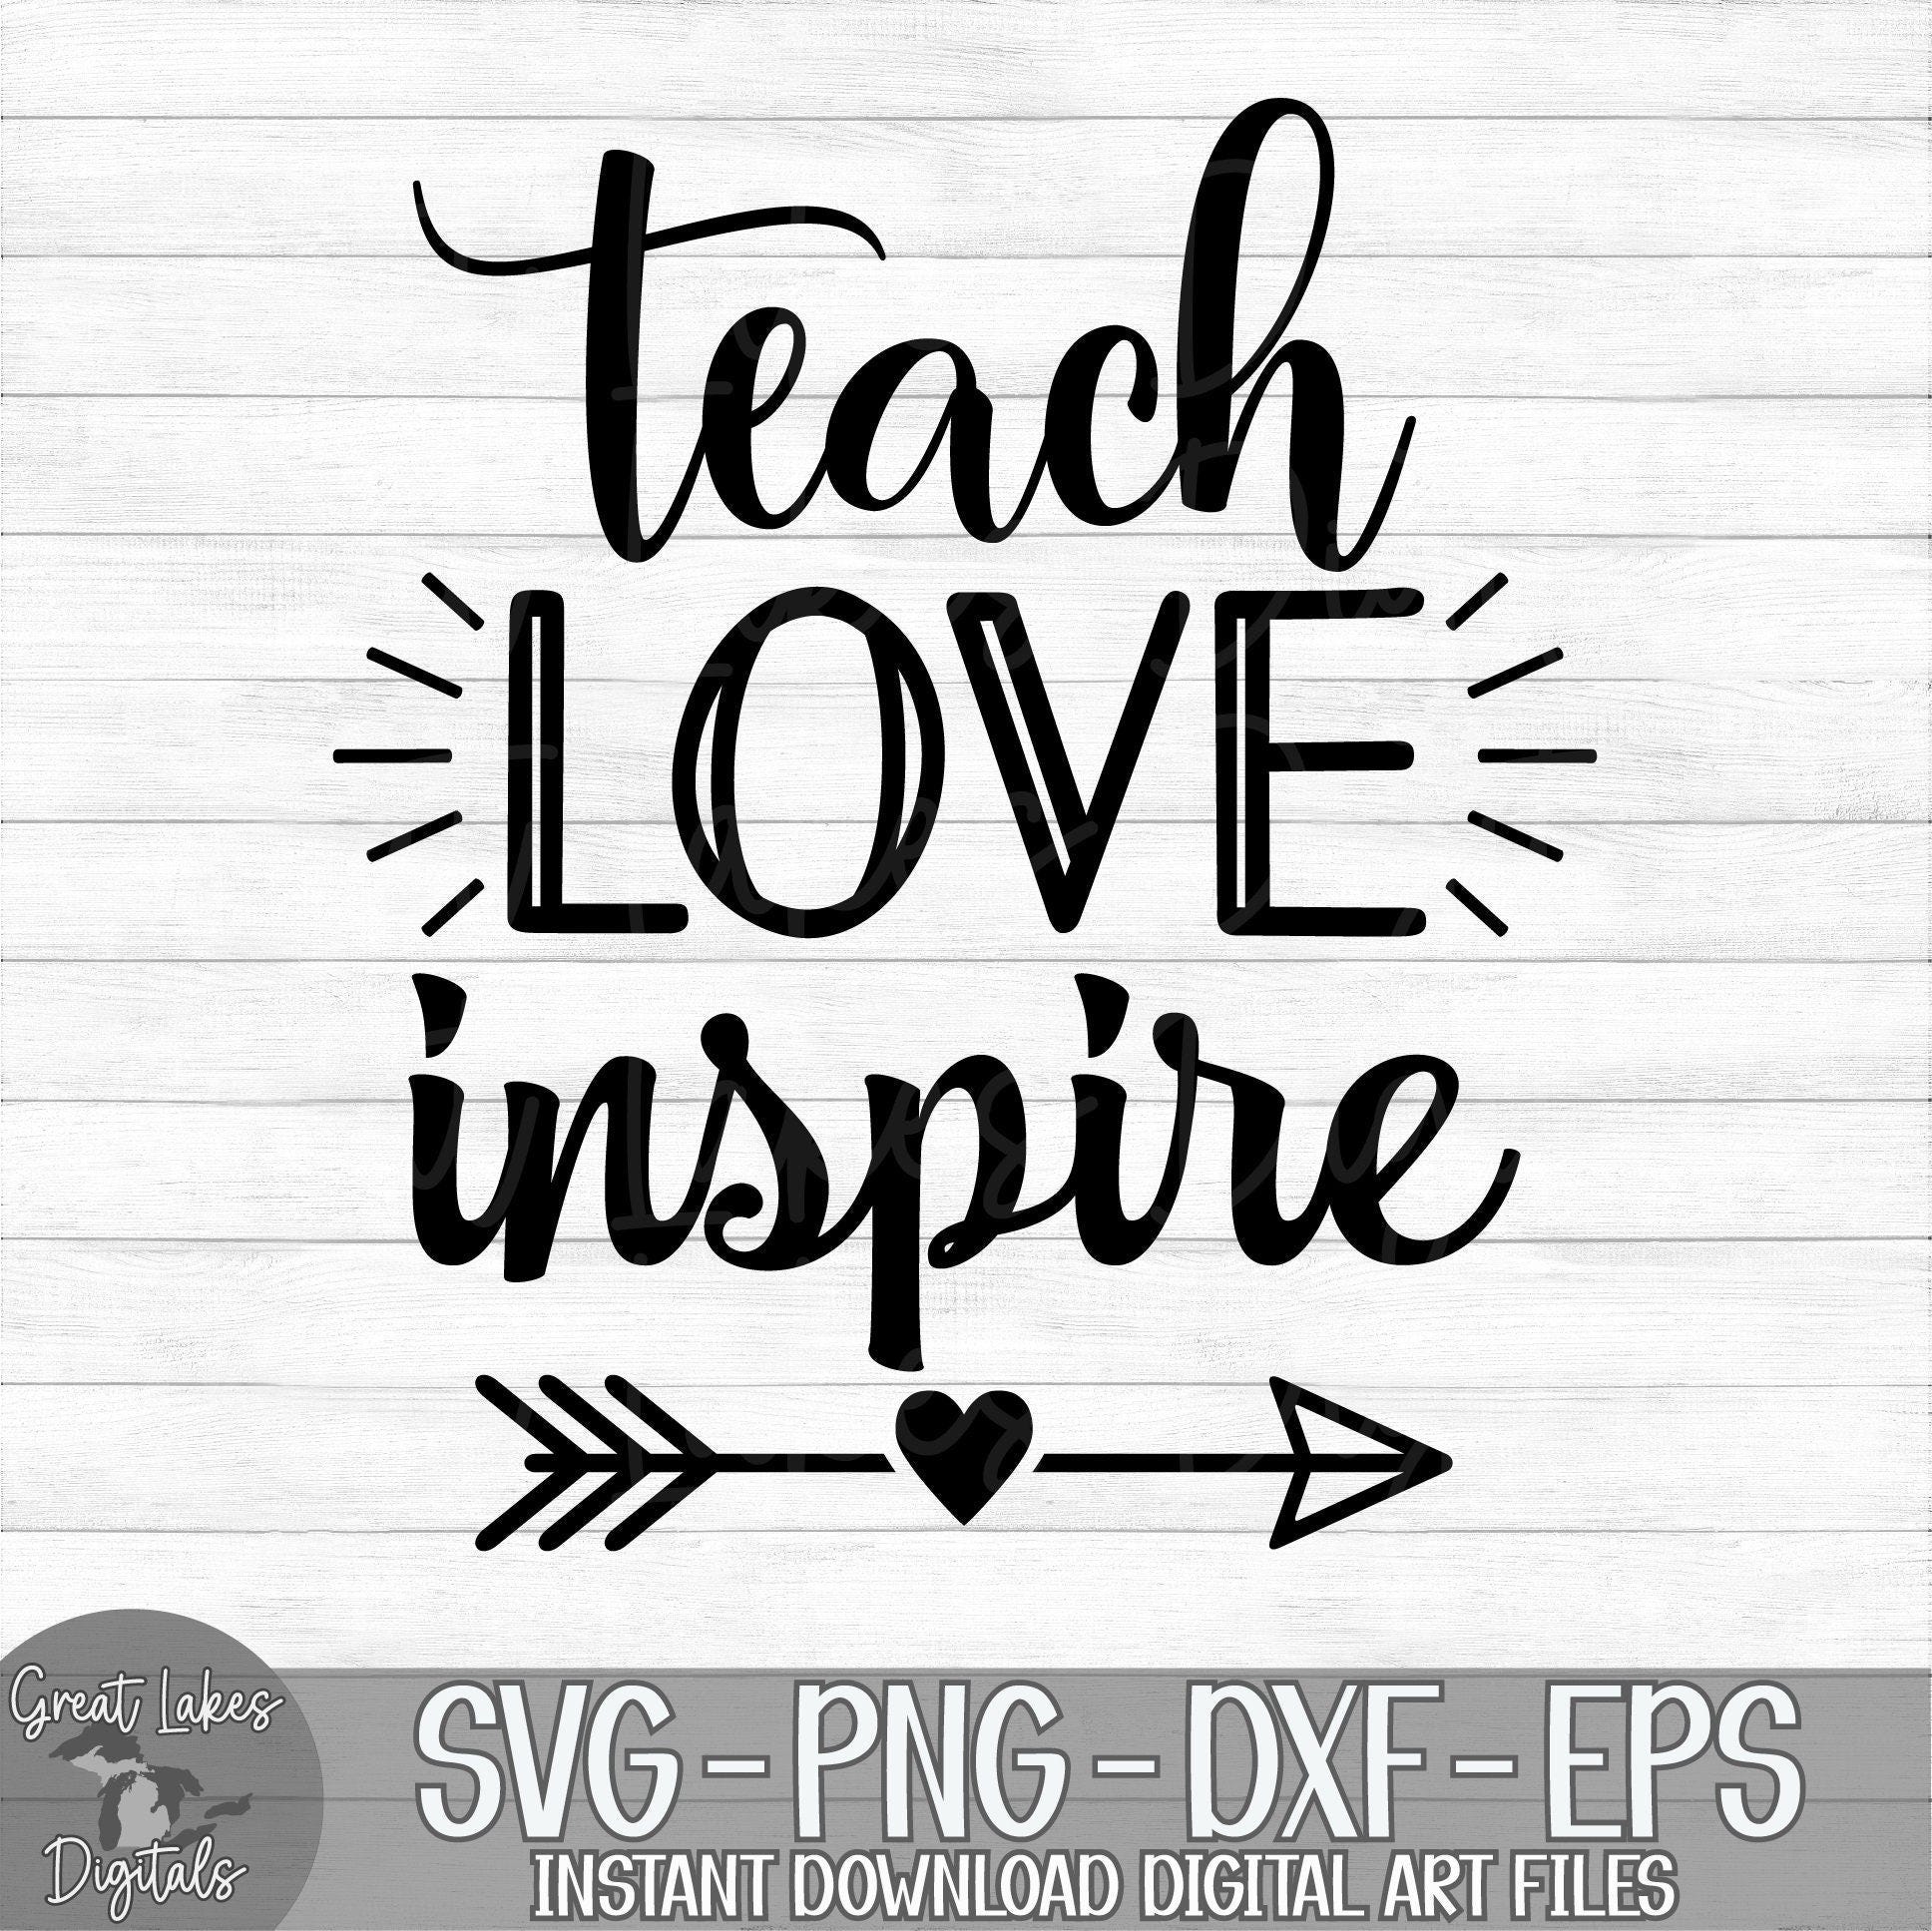 Teach Love Inspire - Instant Digital Download - svg, png, dxf, and eps files included! Back to School, Teacher Appreciation